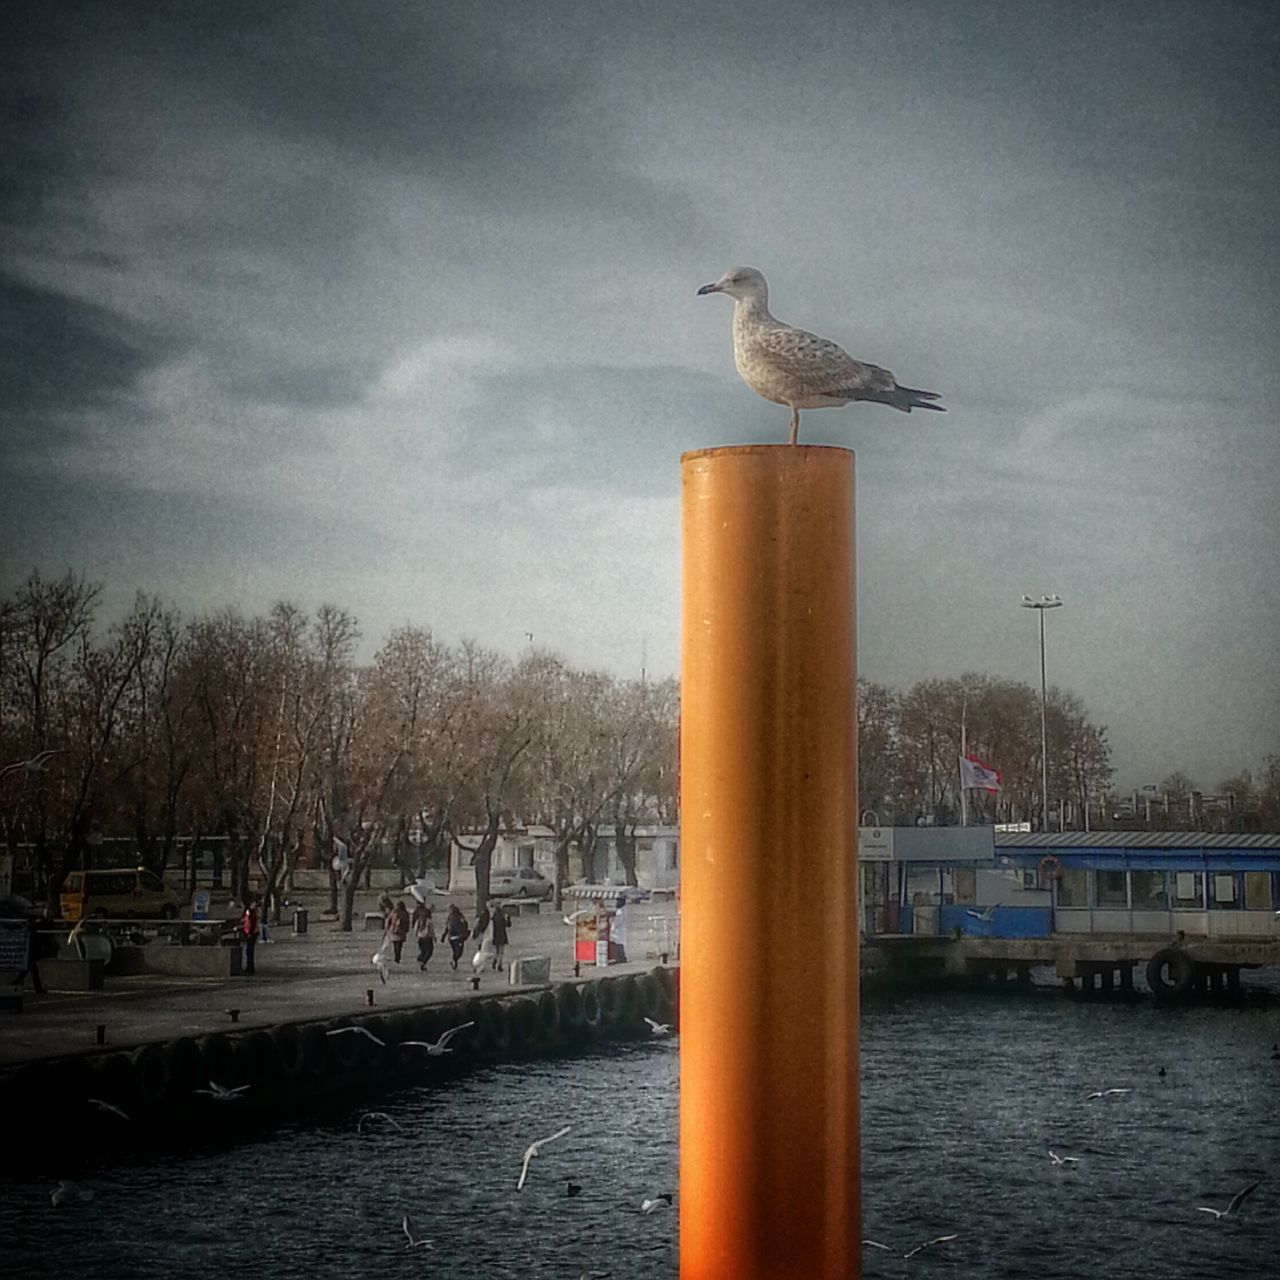 bird, animal themes, animals in the wild, wildlife, water, sky, seagull, one animal, perching, built structure, pier, river, building exterior, architecture, cloud - sky, flying, wooden post, nature, waterfront, outdoors